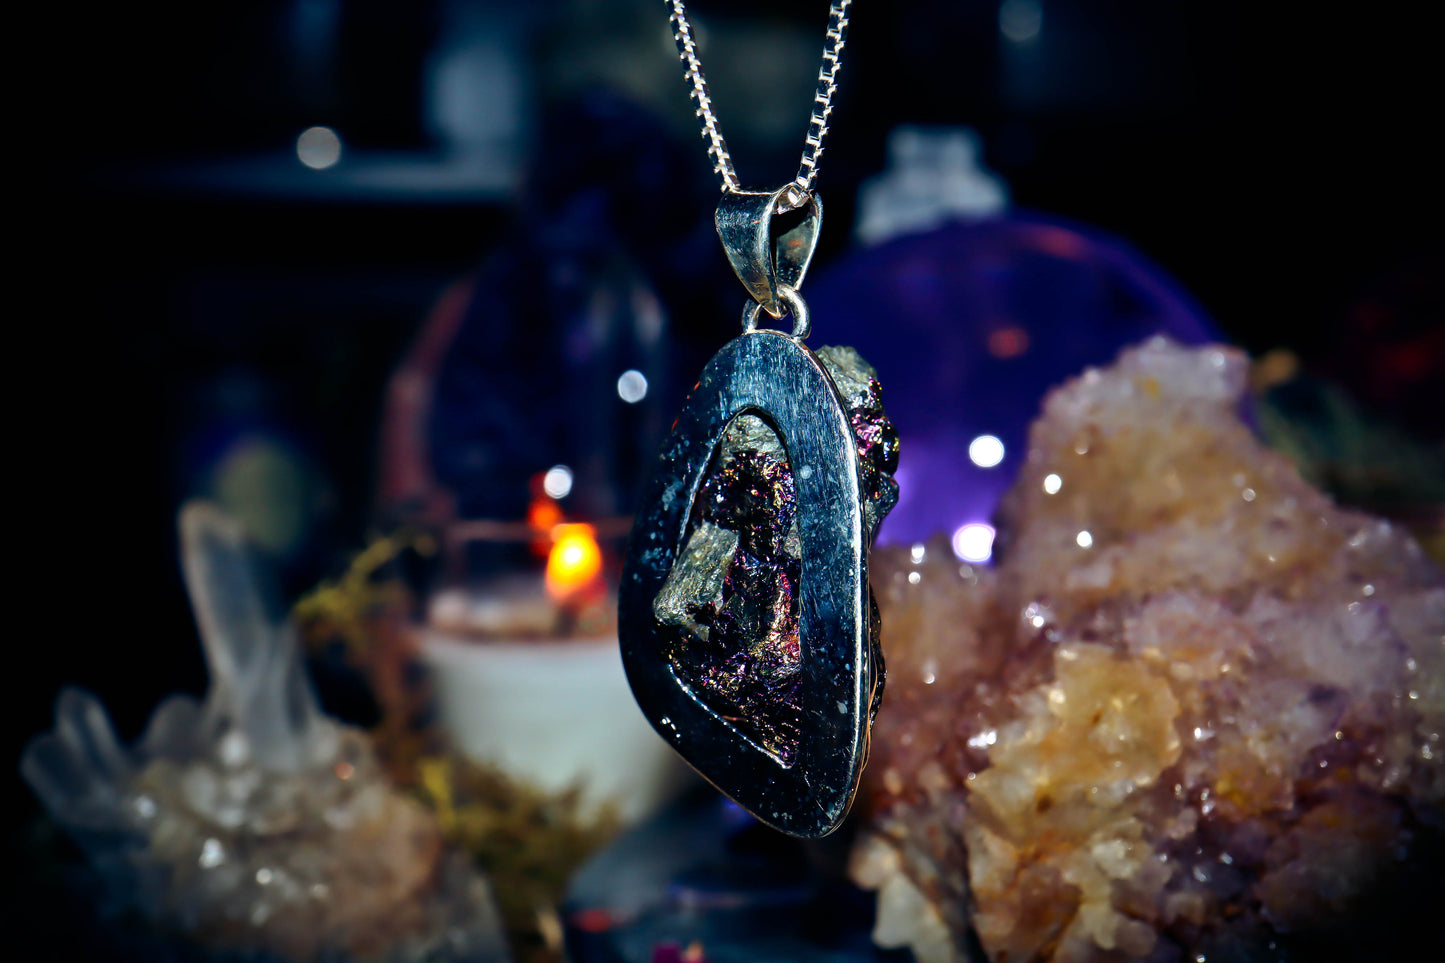 SHAPESHIFTING Metamorphosis Genie Amulet! Change Your Shape! Ancient Occult Rituals & Transformation Spells!